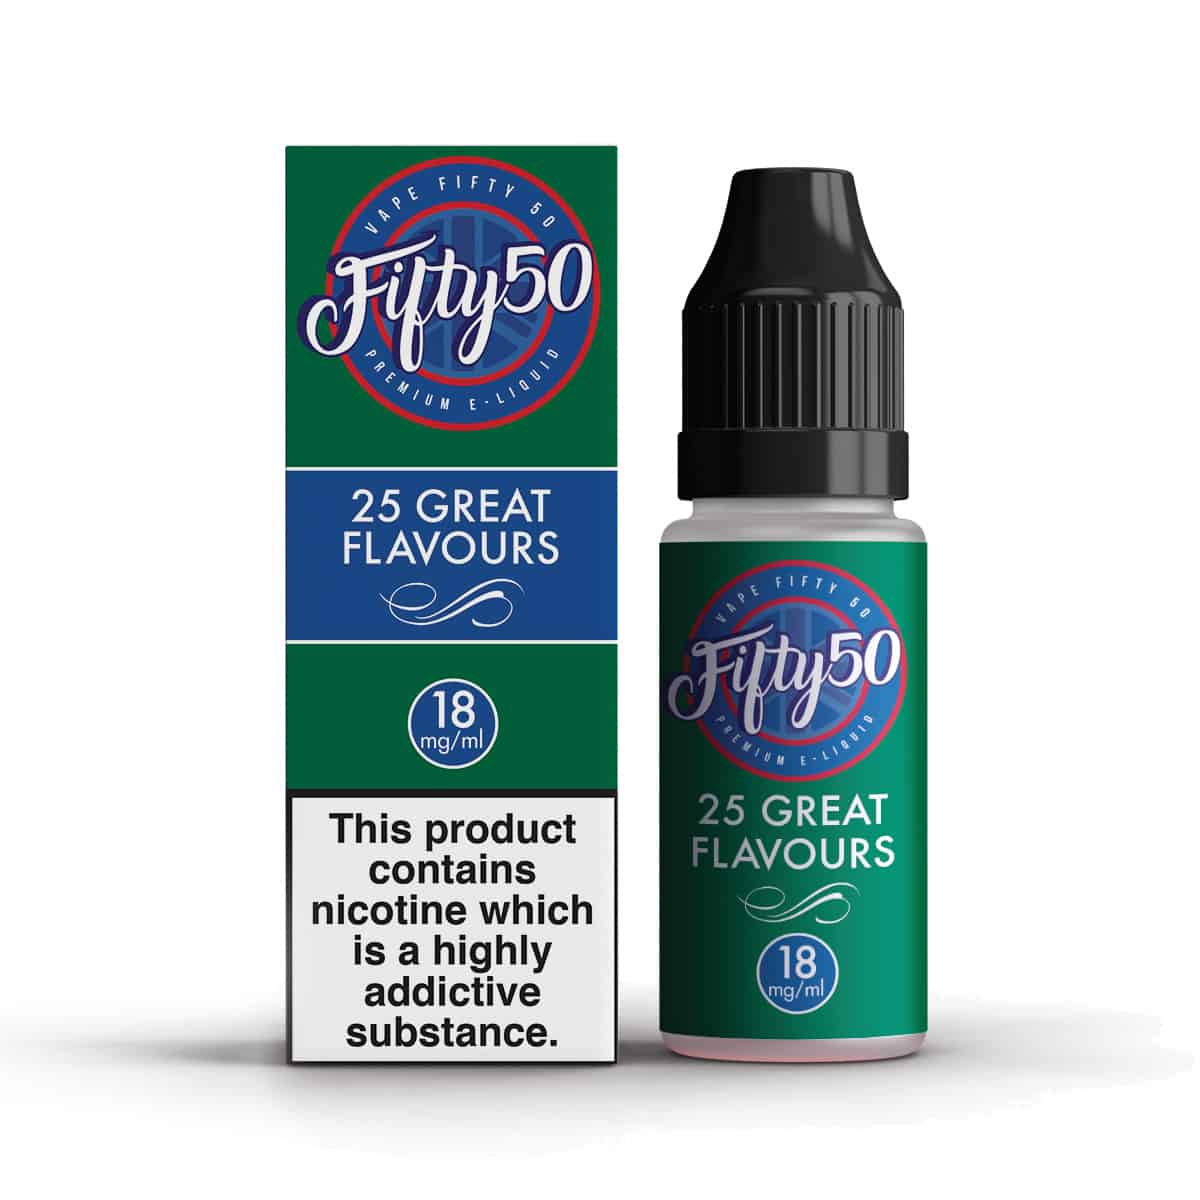 United kingdom UK First Eliquid Subscription Service Vape Made Simple offering Disposables, Freebase, Nic salts -  with a wide variety of disposables Lost Mary Crystal Bar Elf Disposables - 50 Fifty Berry Menthol 18mg